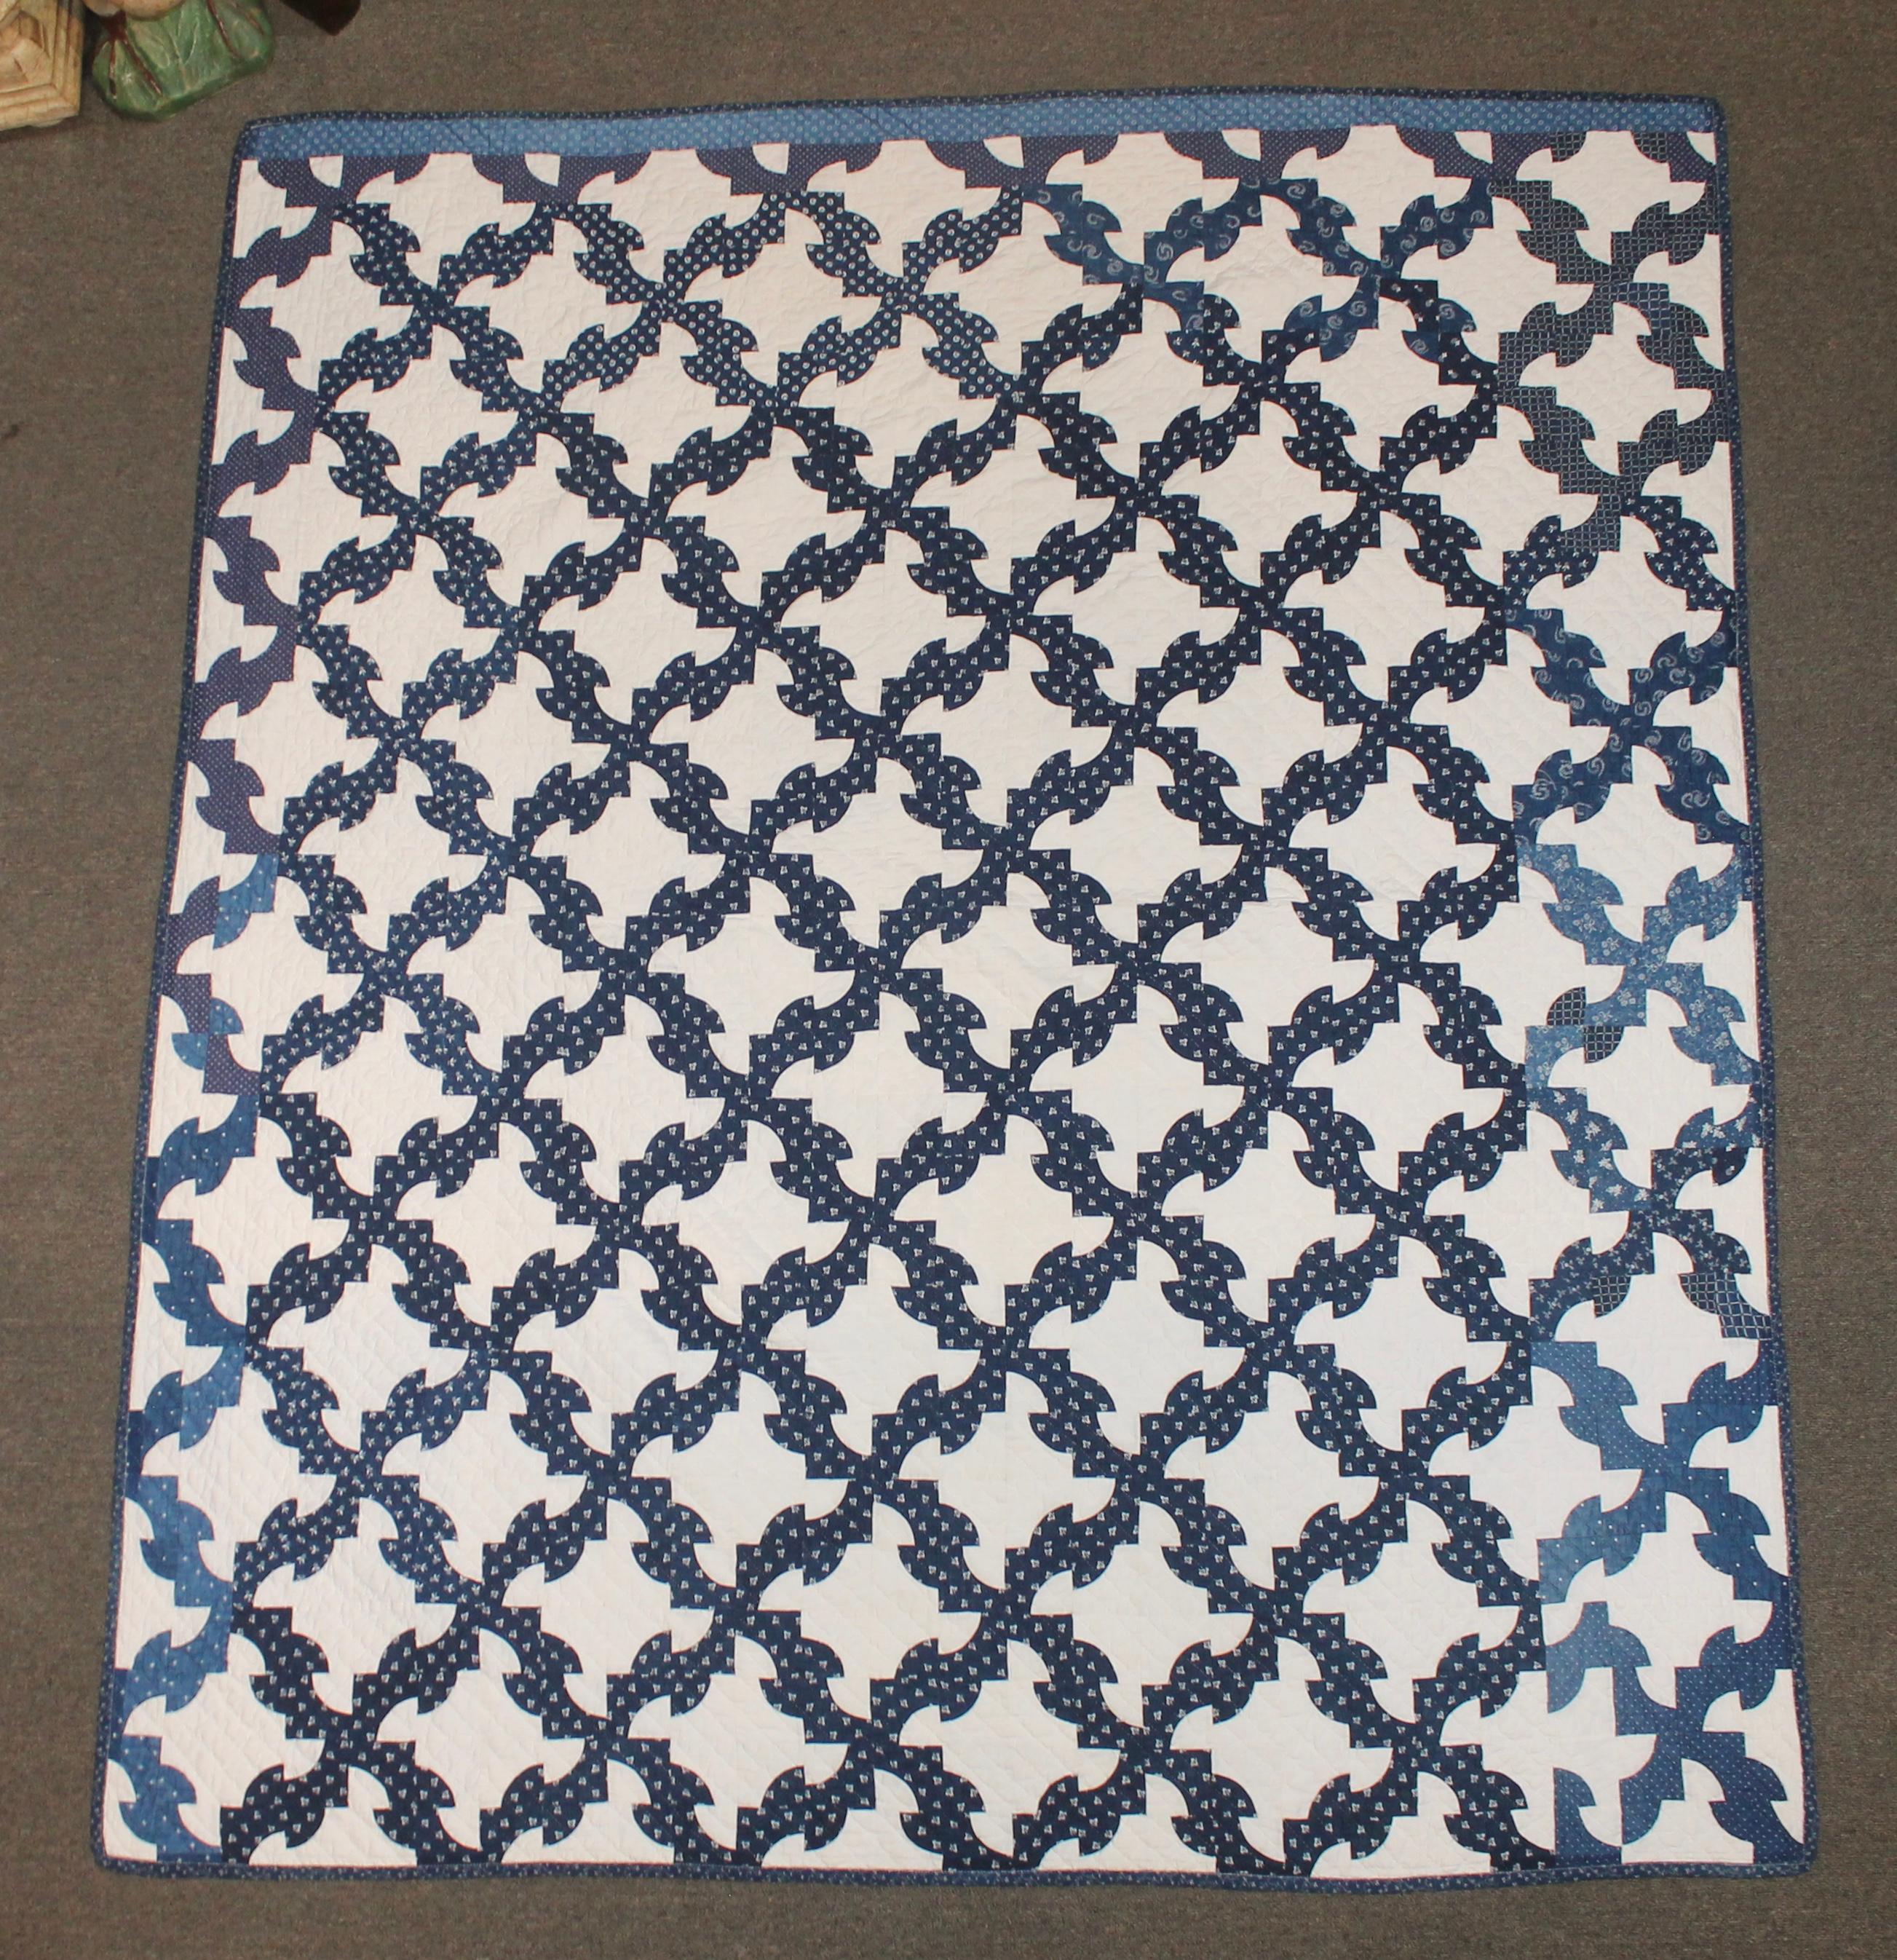 This fine geometric blue and white drunkers/drunkard's path pattern quilt is in different calico blues and in good condition. One edge is in a faded blue calico fabric. This quilt is quite clean and nice piecework.